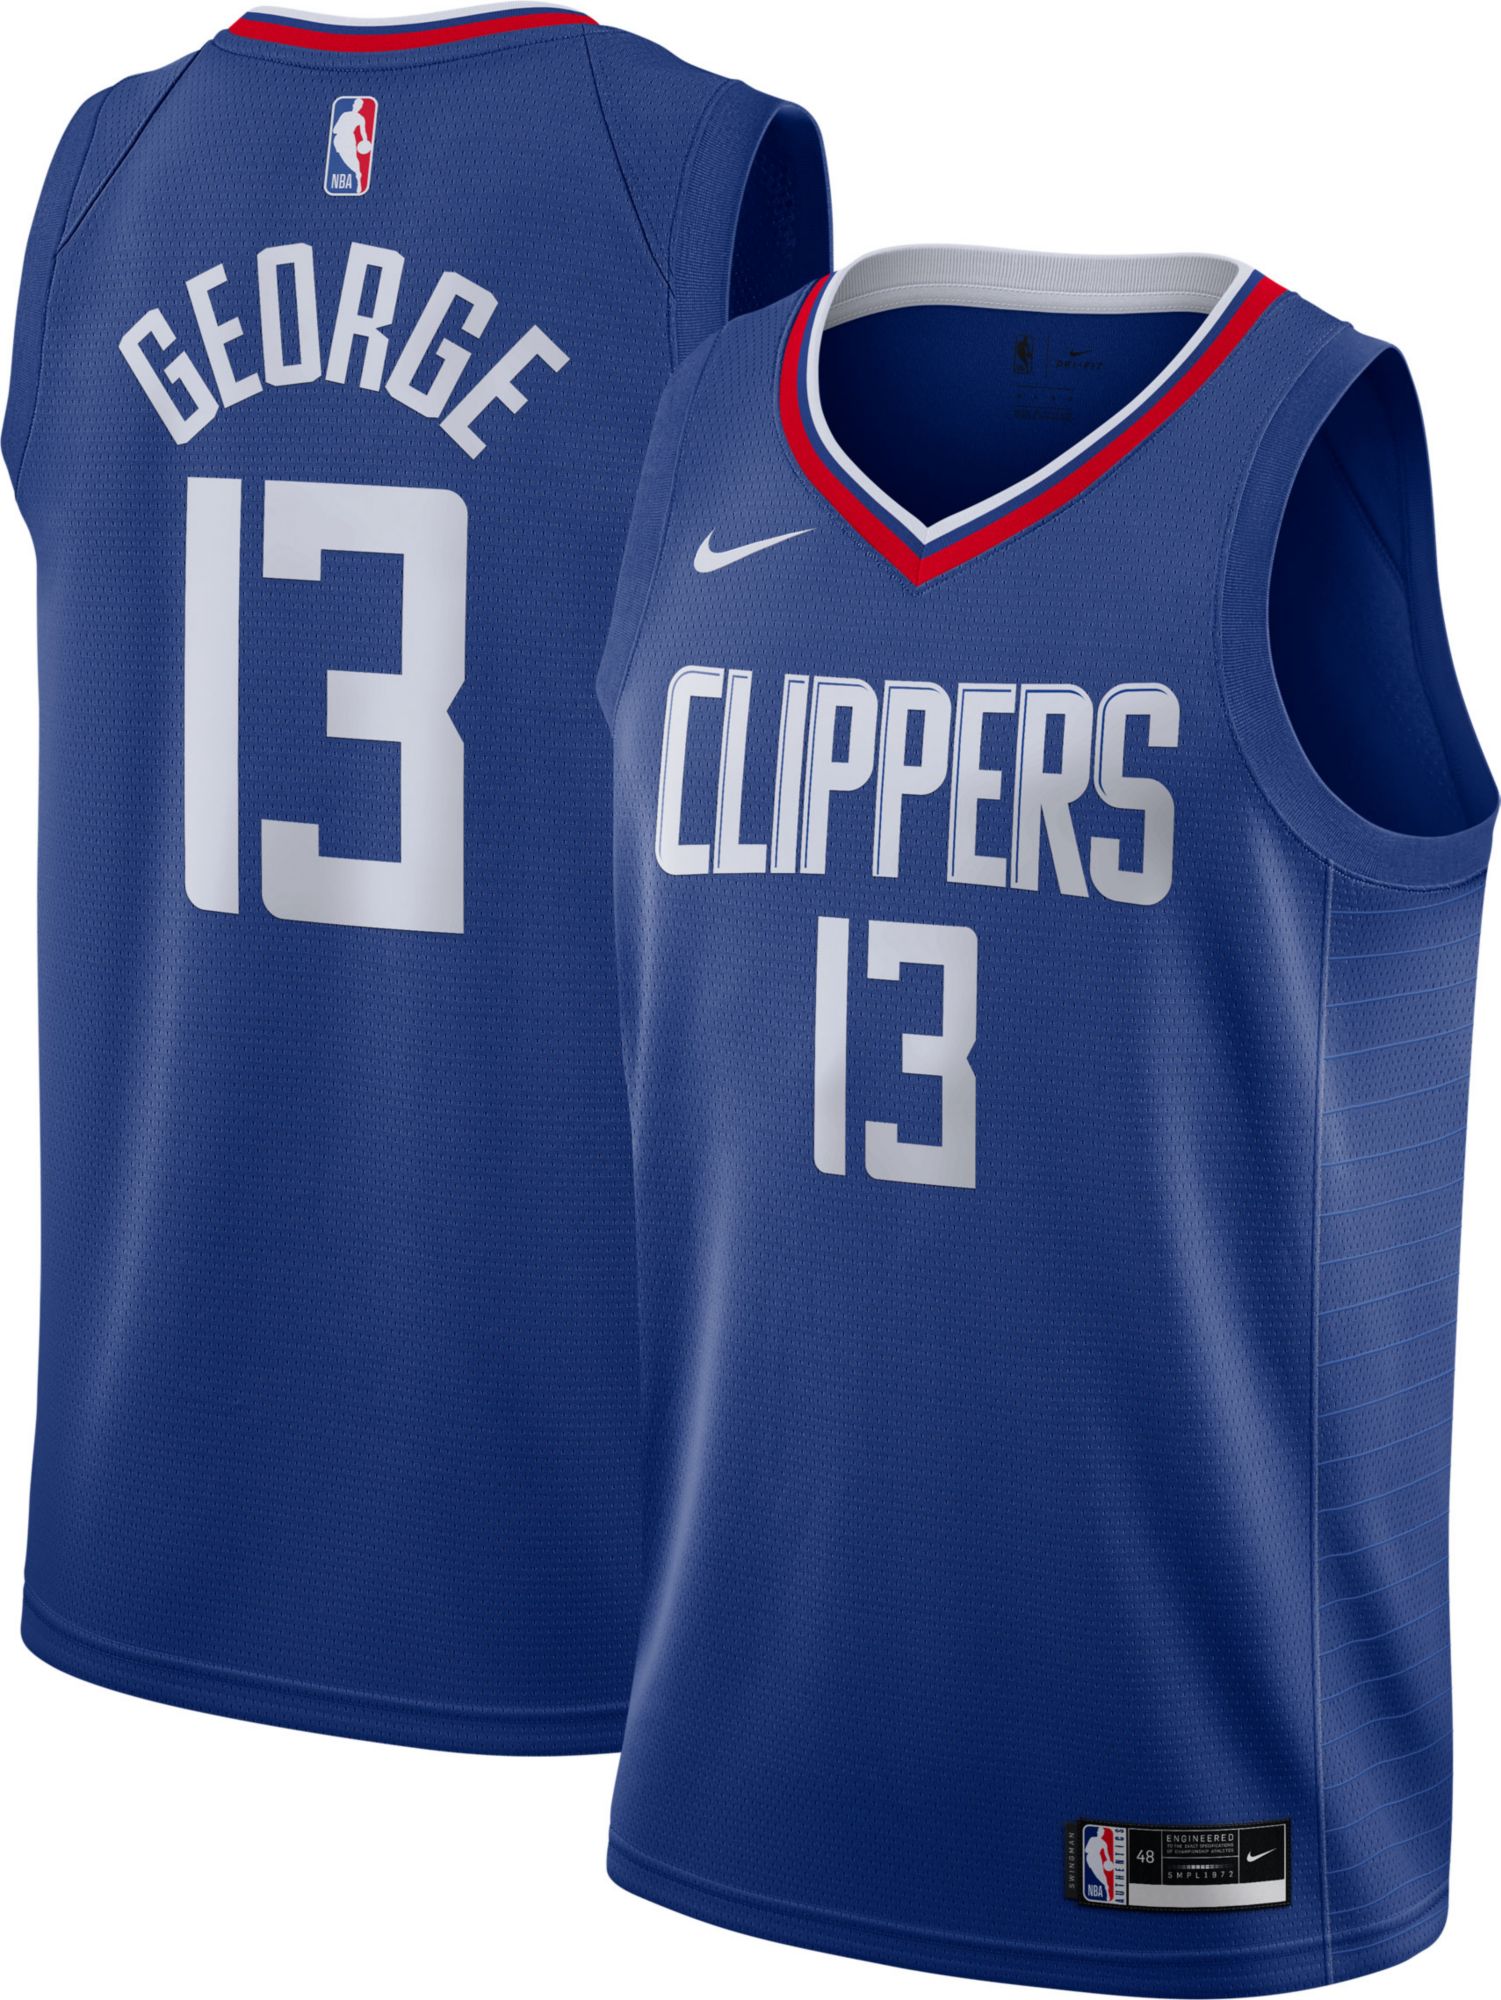 clippers paul george jersey